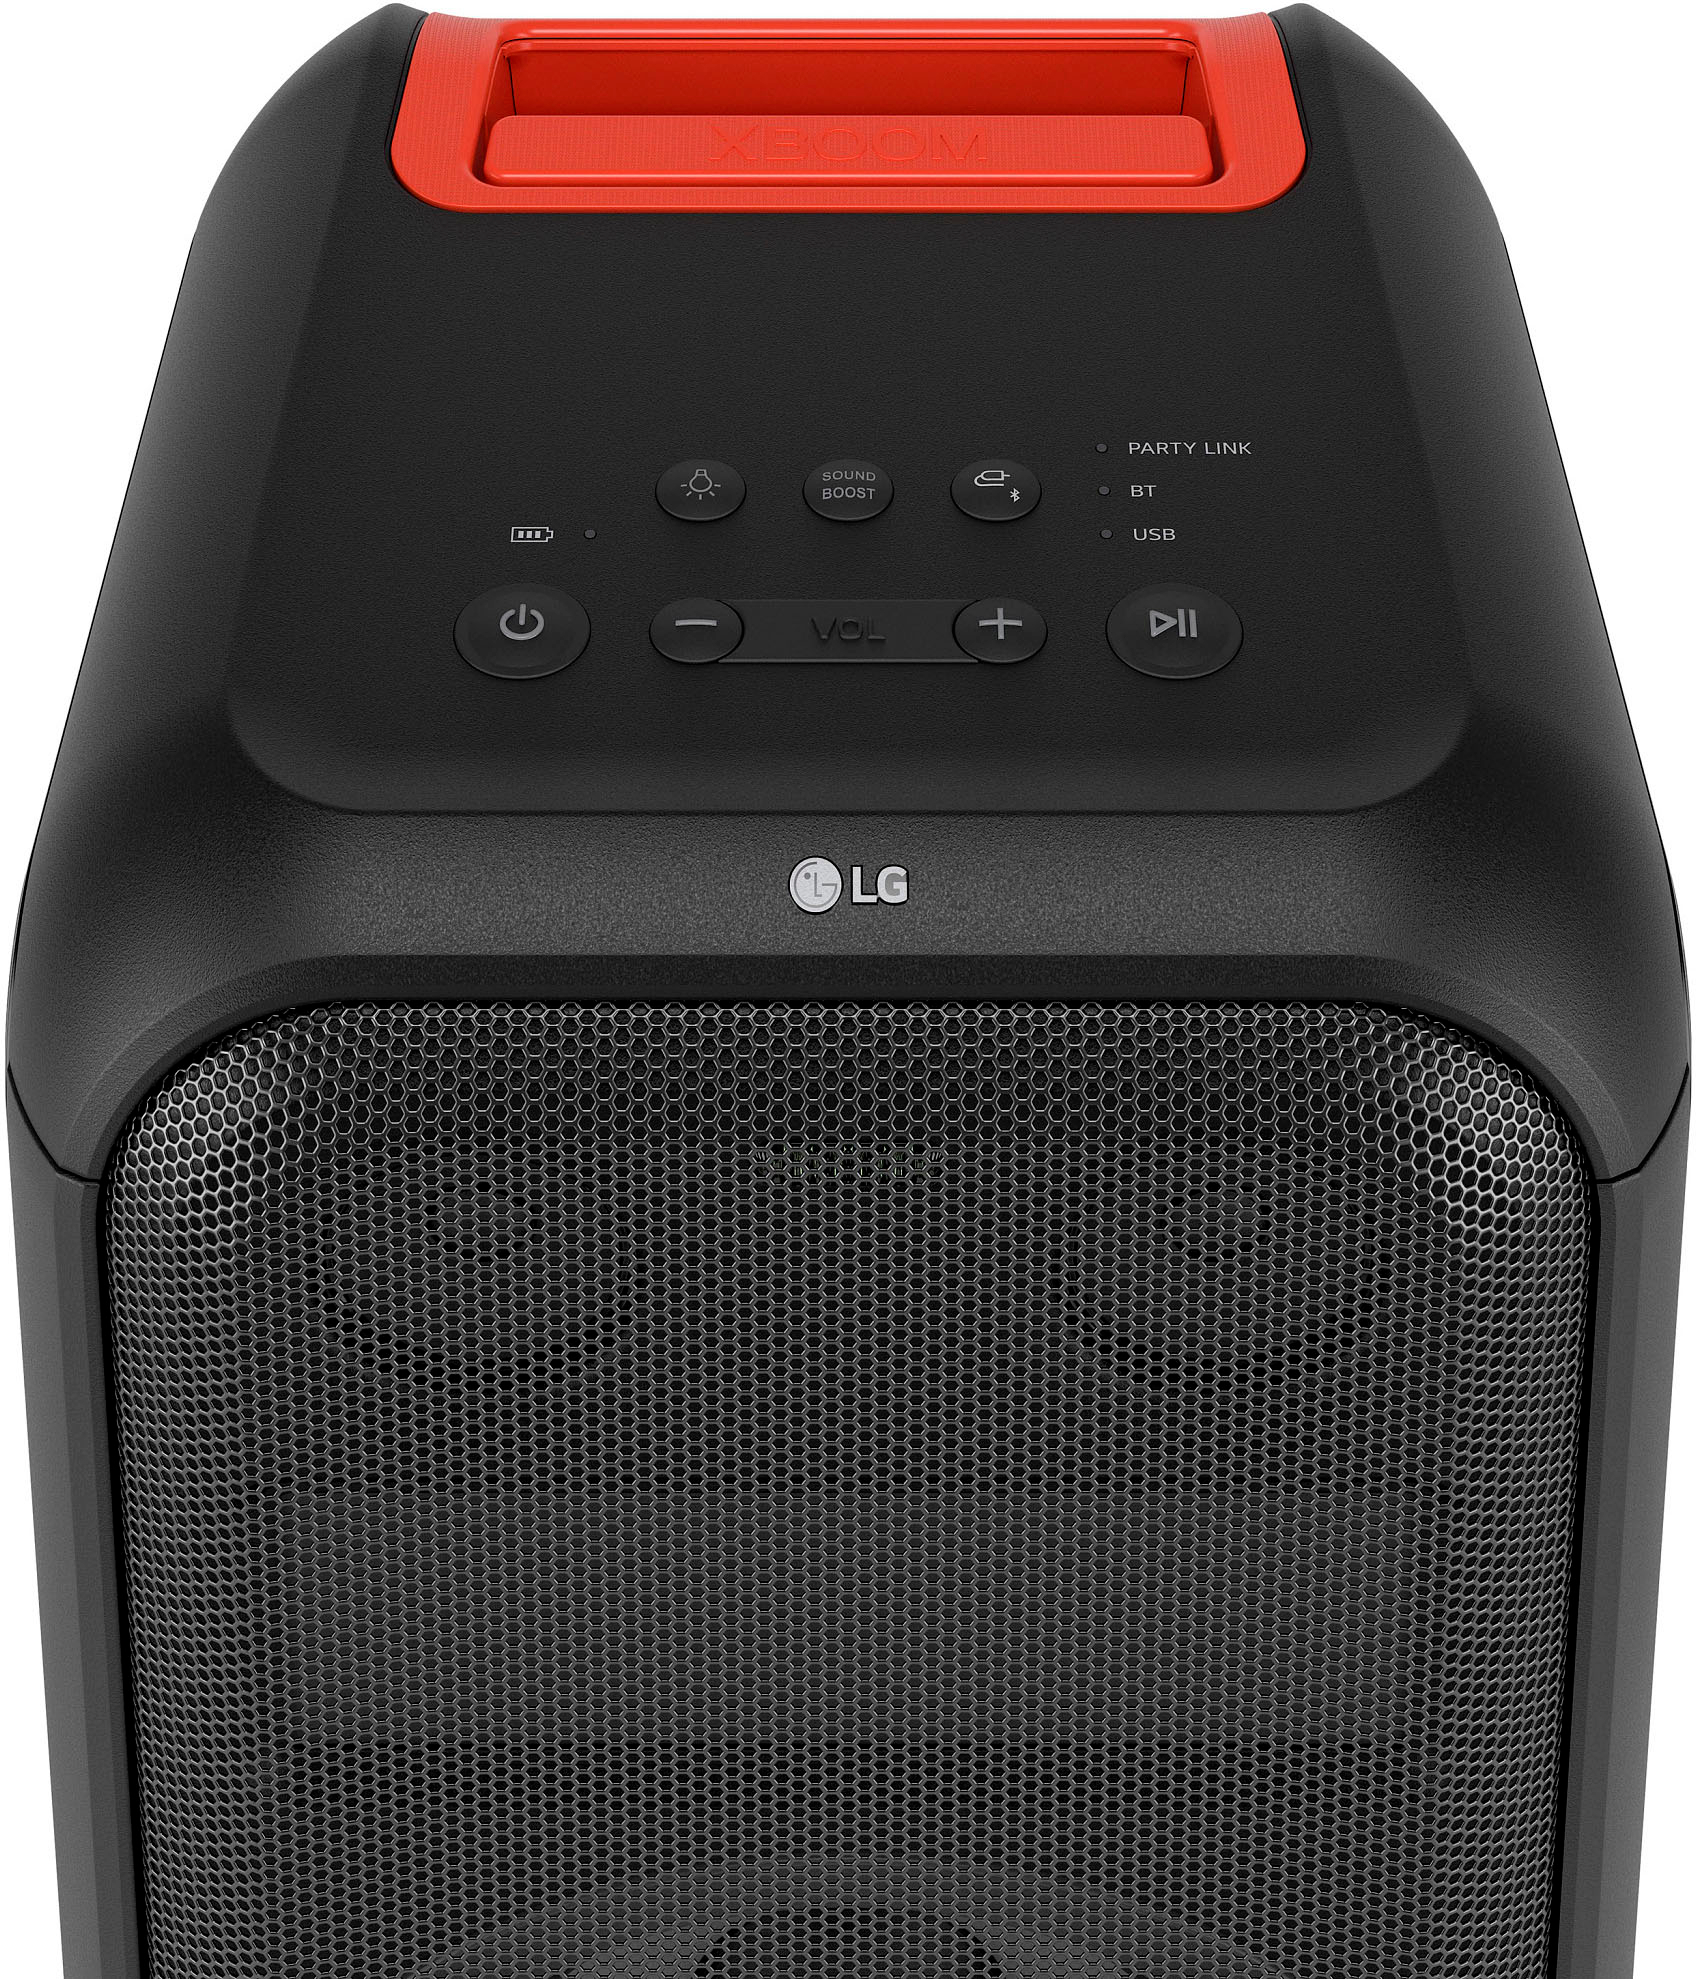 Tower LED Pixel Party Best XL7 Buy Portable Black - Speaker with LG XL7S XBOOM